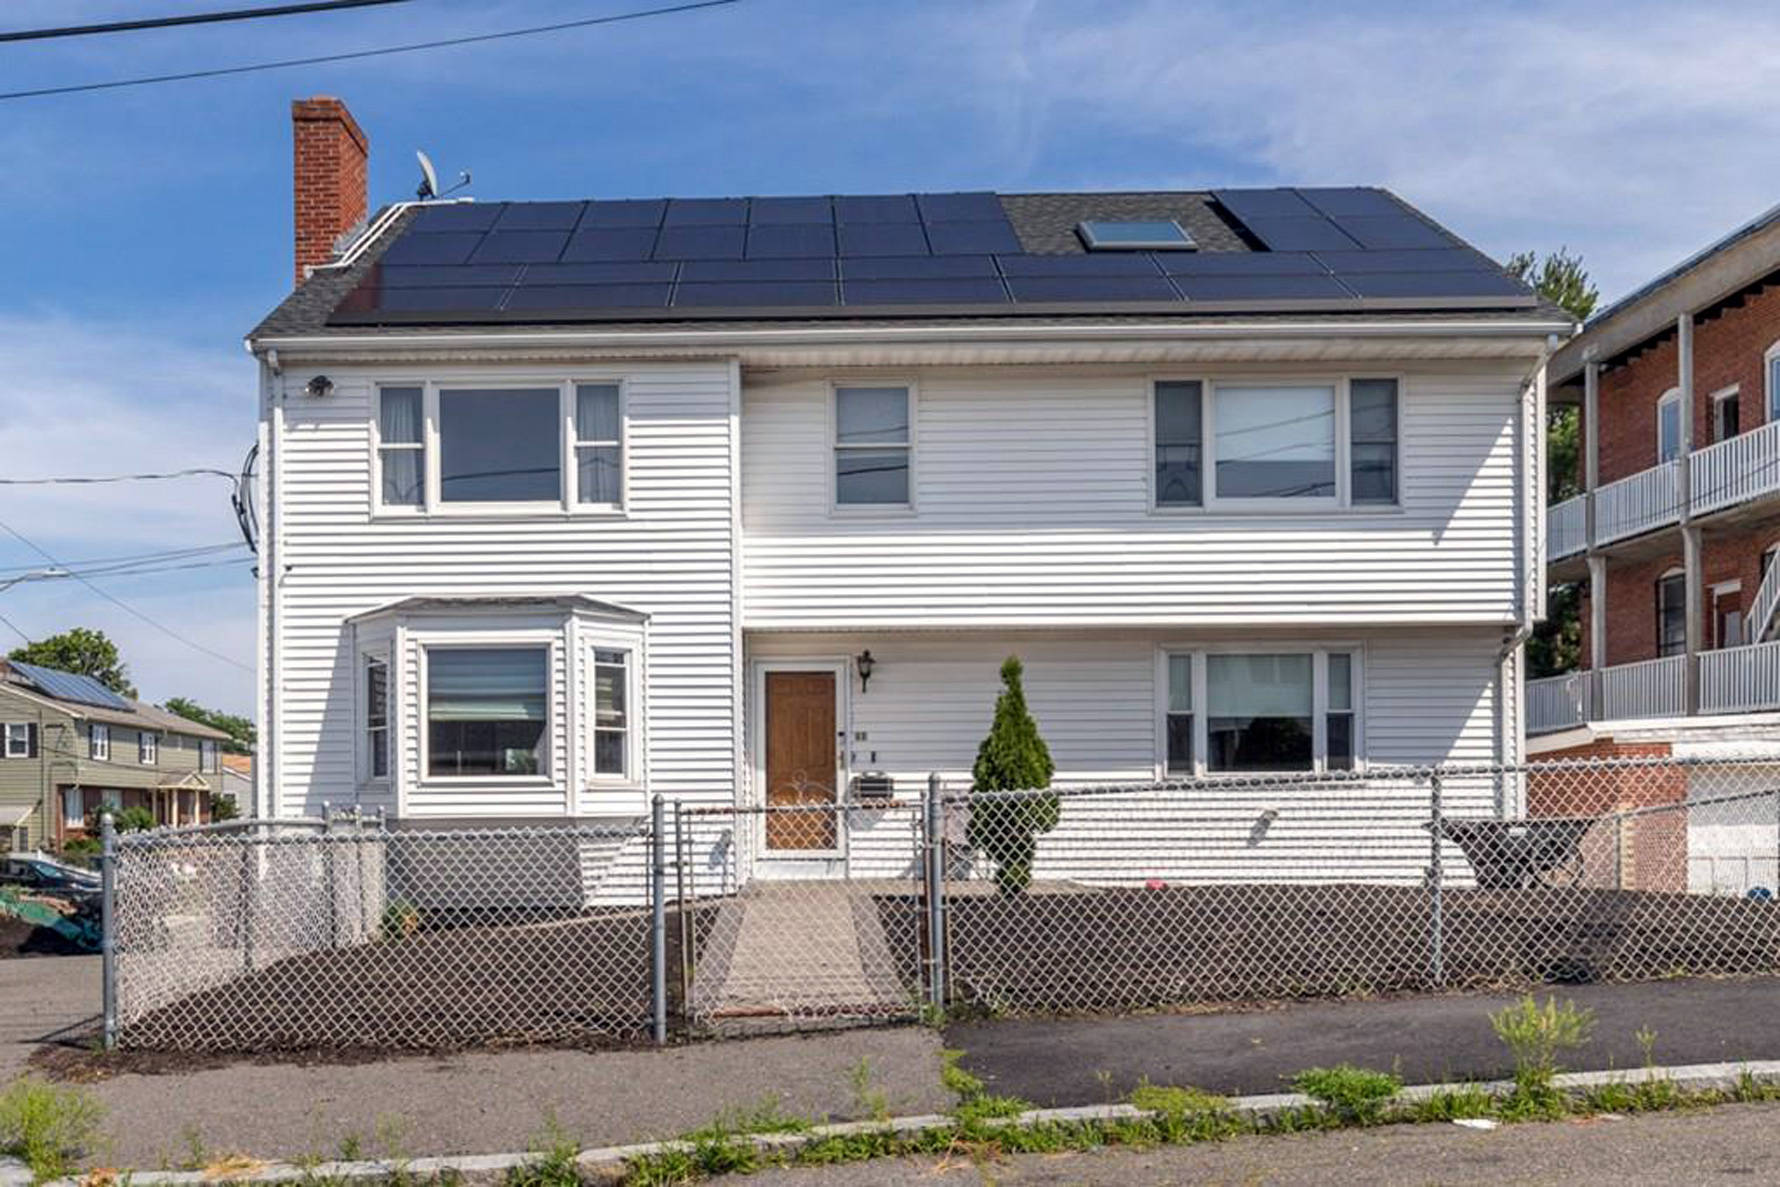 SOLD, 11 Graves Road, Revere, MA 02151